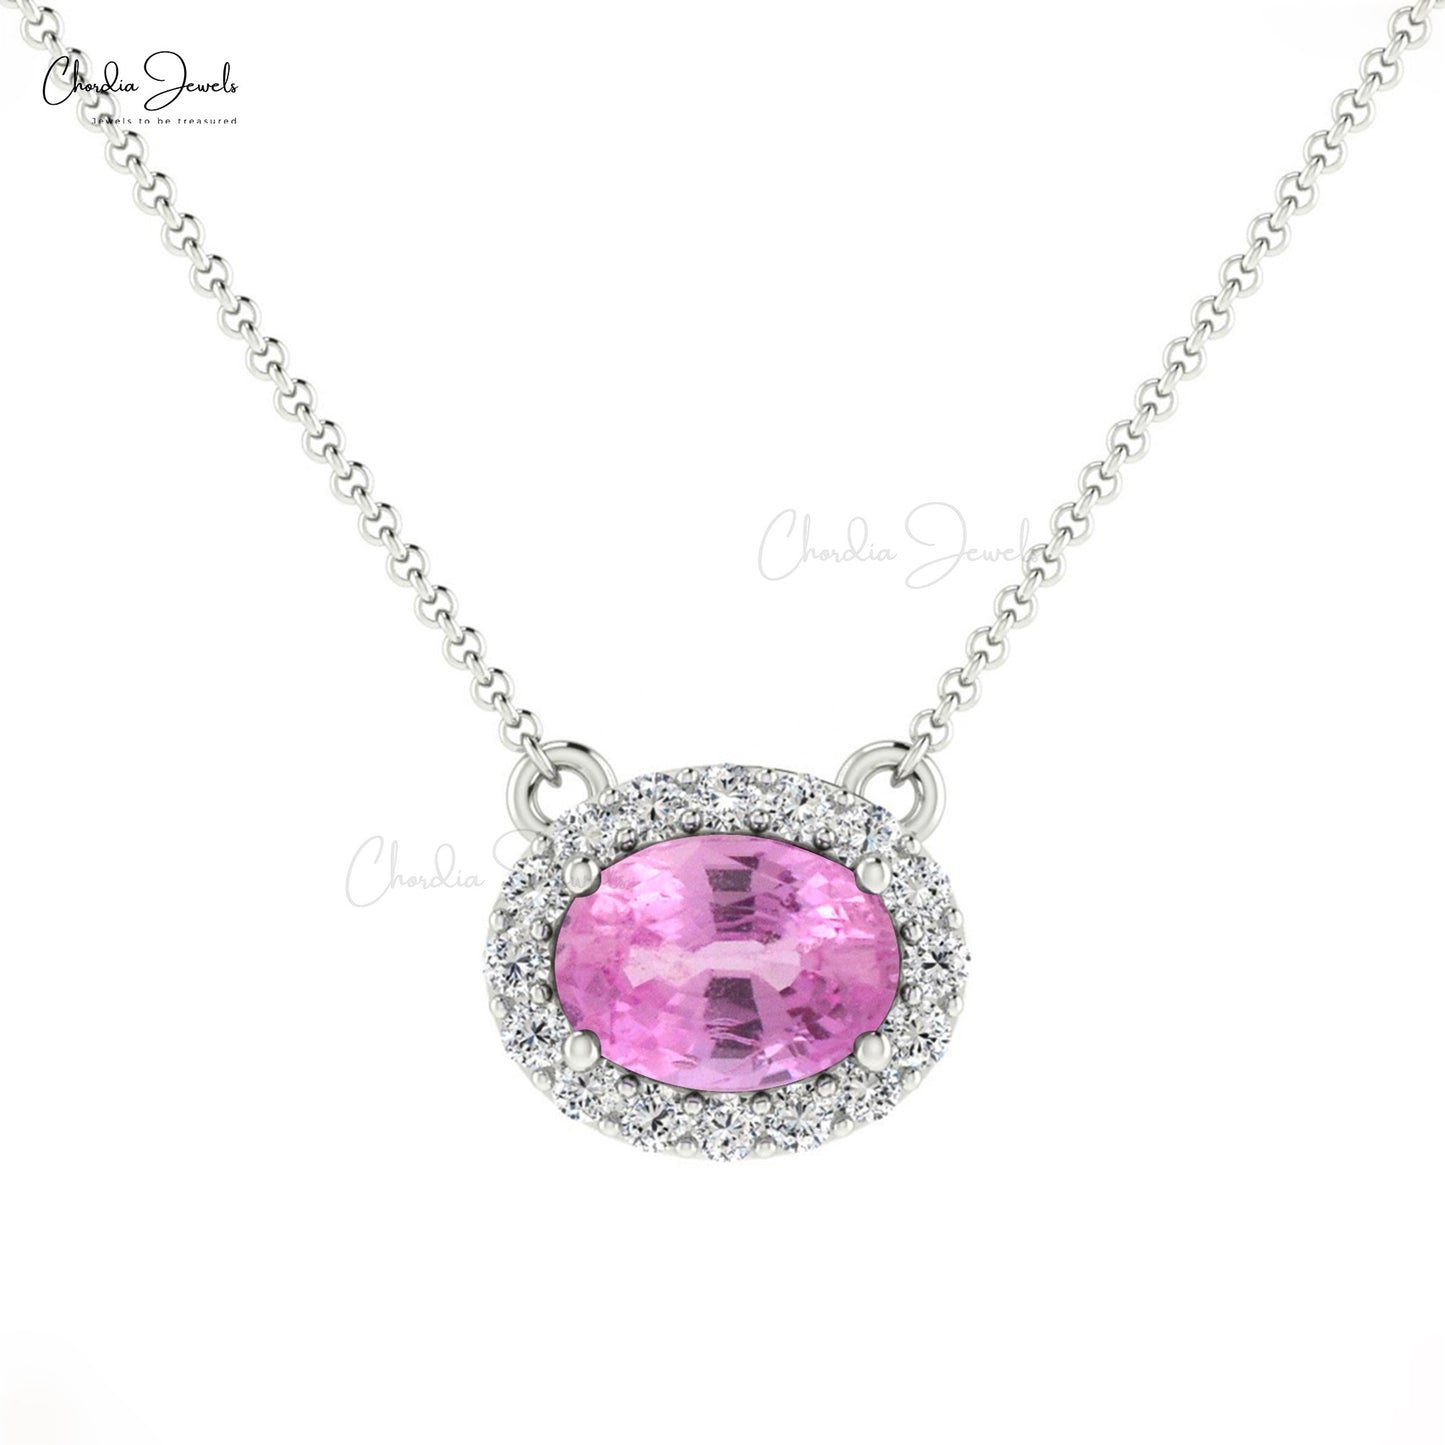 Natural Pink Sapphire Necklace, 14k Solid Gold Diamond Necklace, 0.75 Carats Oval Faceted Gemstone Necklace Women's Jewelry, Gift for Her